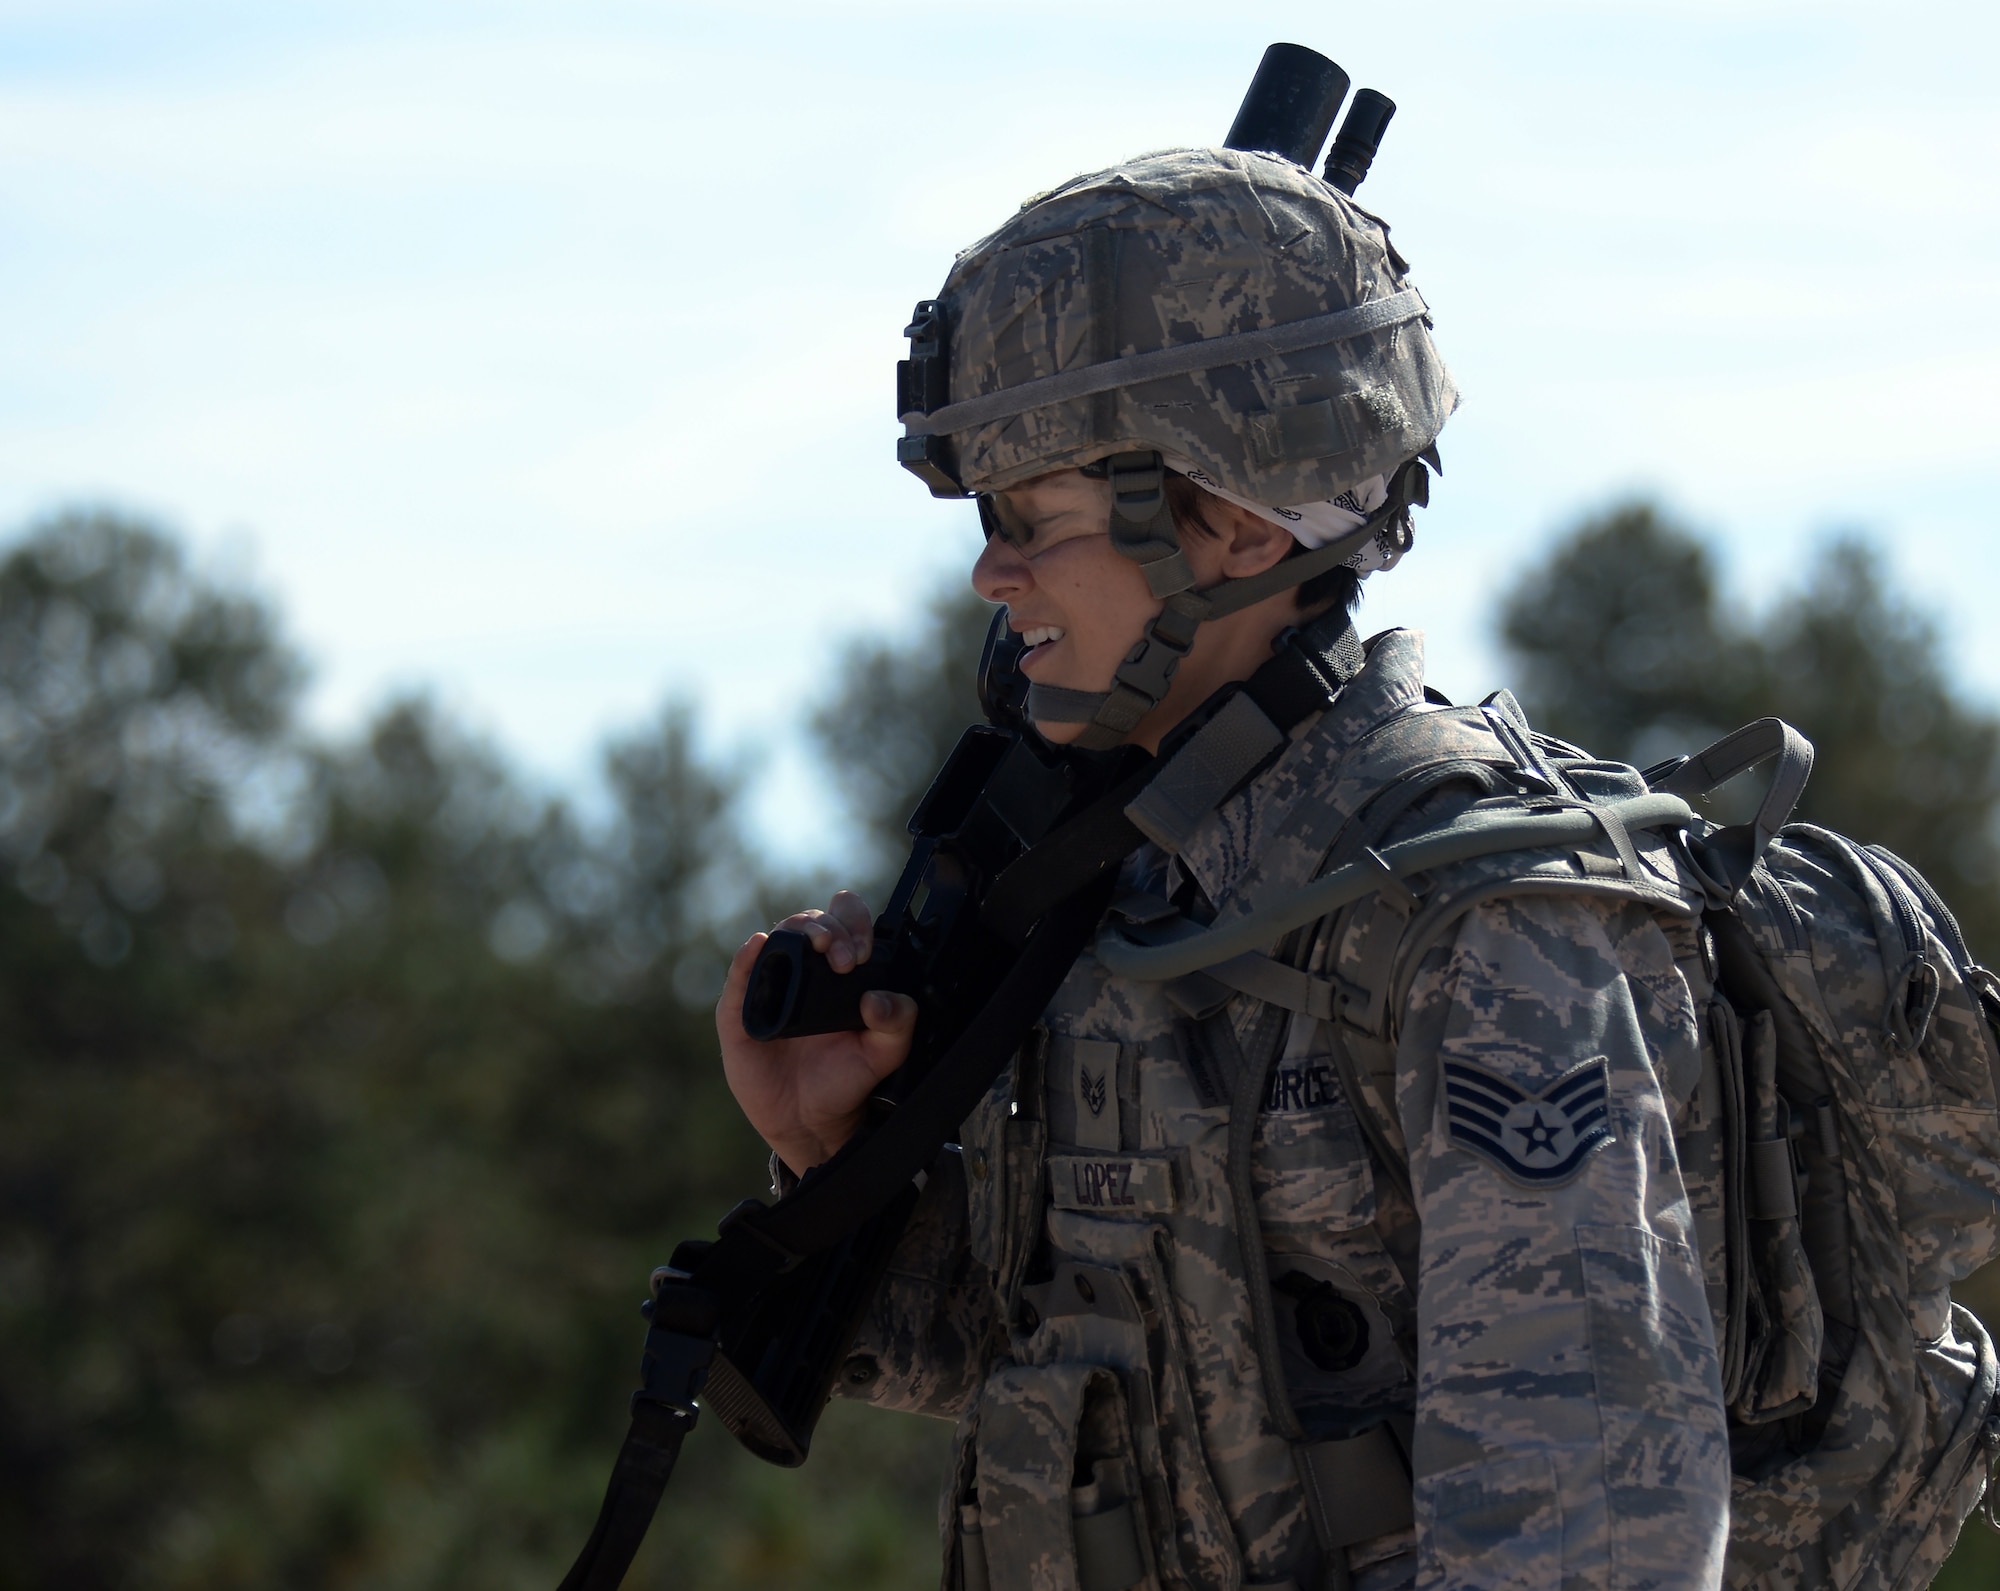 Staff Sgt. Natalie Lopez, 7th Bomb Wing, Dyess Air Force Base, Texas, pushes through pain while running from one shooting range to the next Sept. 22, 2015, during the shooting range portion of the 2015 Global Strike Challenge security forces competition on Camp Guernsey, Wyo. Each portion of the GSC was designed to test security forces Airmen on day-to-day skills as well as pushing them physically. (U.S. Air Force photo by Senior Airman Brandon Valle)